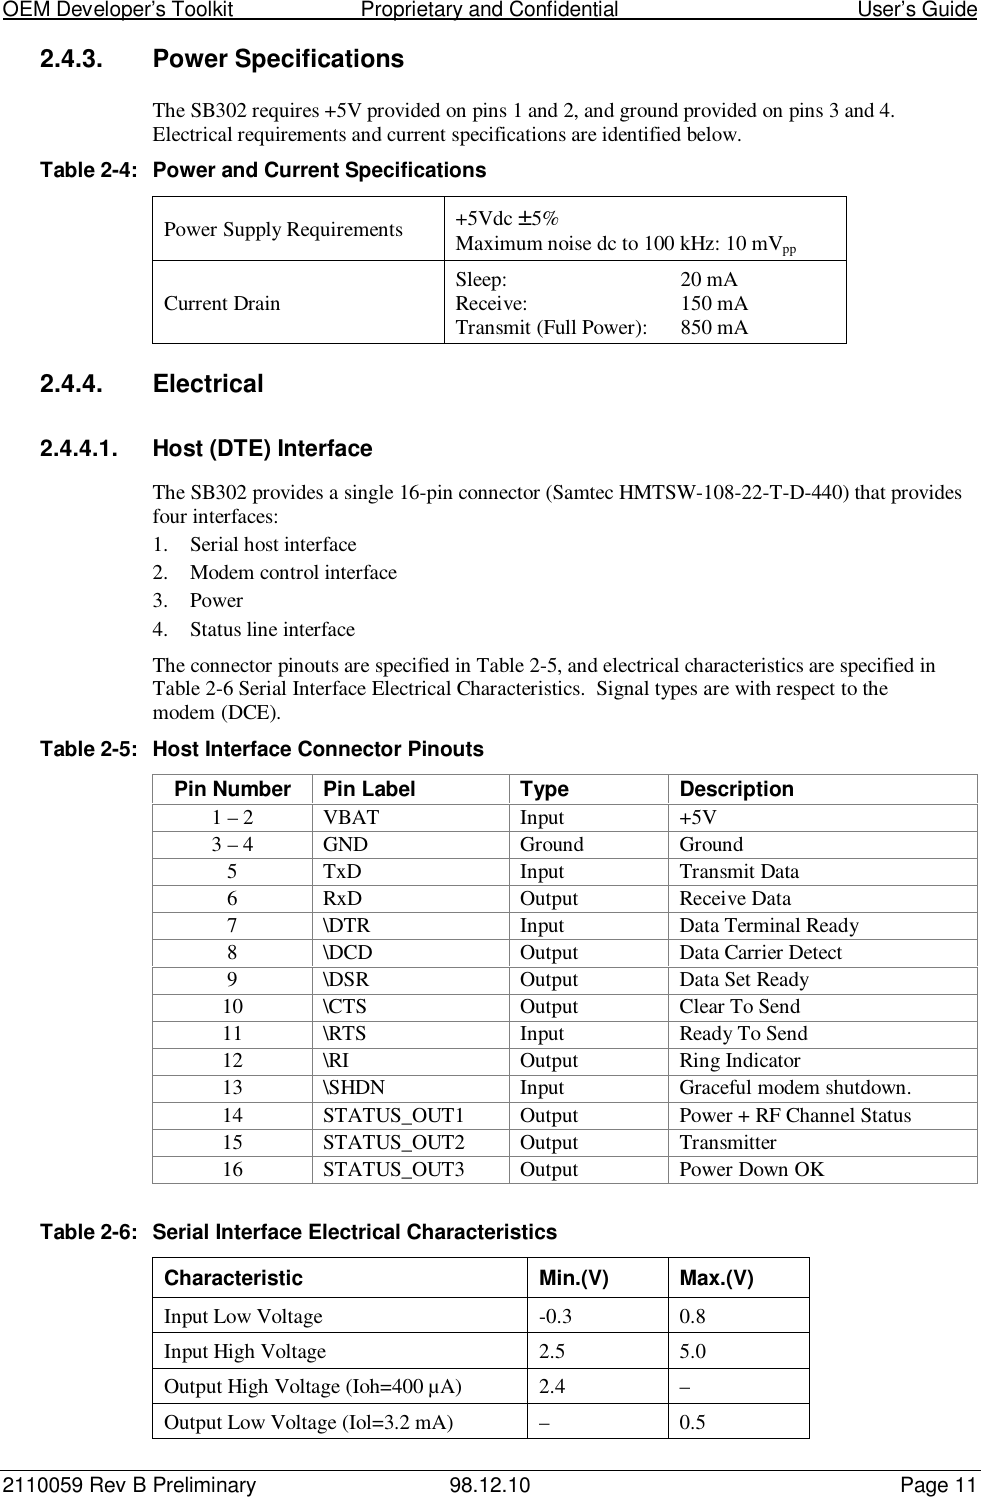 OEM Developer’s Toolkit                        Proprietary and Confidential                                        User’s Guide2110059 Rev B Preliminary 98.12.10 Page 112.4.3.  Power SpecificationsThe SB302 requires +5V provided on pins 1 and 2, and ground provided on pins 3 and 4.Electrical requirements and current specifications are identified below.Table 2-4: Power and Current SpecificationsPower Supply Requirements +5Vdc ±5%Maximum noise dc to 100 kHz: 10 mVppCurrent Drain Sleep: 20 mAReceive: 150 mATransmit (Full Power): 850 mA2.4.4. Electrical2.4.4.1.  Host (DTE) InterfaceThe SB302 provides a single 16-pin connector (Samtec HMTSW-108-22-T-D-440) that providesfour interfaces:1. Serial host interface2. Modem control interface3. Power4. Status line interfaceThe connector pinouts are specified in Table 2-5, and electrical characteristics are specified inTable 2-6 Serial Interface Electrical Characteristics.  Signal types are with respect to themodem (DCE).Table 2-5: Host Interface Connector PinoutsPin Number Pin Label Type Description1 – 2 VBAT Input +5V3 – 4 GND Ground Ground5 TxD Input Transmit Data6 RxD Output Receive Data7 \DTR Input Data Terminal Ready8 \DCD Output Data Carrier Detect9 \DSR Output Data Set Ready10 \CTS Output Clear To Send11 \RTS Input Ready To Send12 \RI Output Ring Indicator13 \SHDN Input Graceful modem shutdown.14 STATUS_OUT1 Output Power + RF Channel Status15 STATUS_OUT2 Output Transmitter16 STATUS_OUT3 Output Power Down OKTable 2-6: Serial Interface Electrical CharacteristicsCharacteristic Min.(V) Max.(V)Input Low Voltage -0.3 0.8Input High Voltage 2.5 5.0Output High Voltage (Ioh=400 µA) 2.4 –Output Low Voltage (Iol=3.2 mA) – 0.5